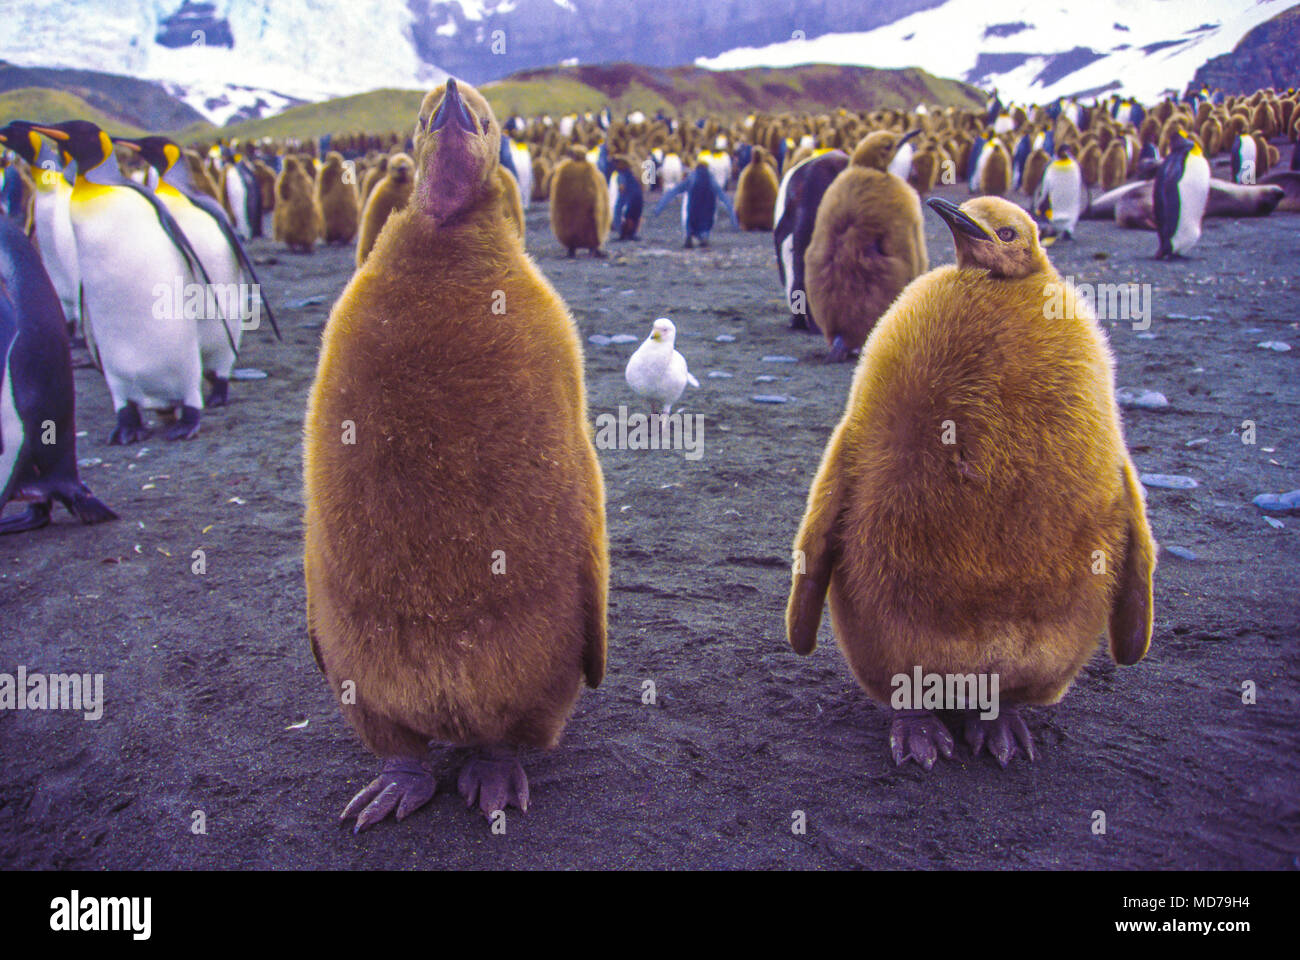 King penguin chicks in fluff before molting to adult plummage, South Georgia Island, Antarctica Stock Photo